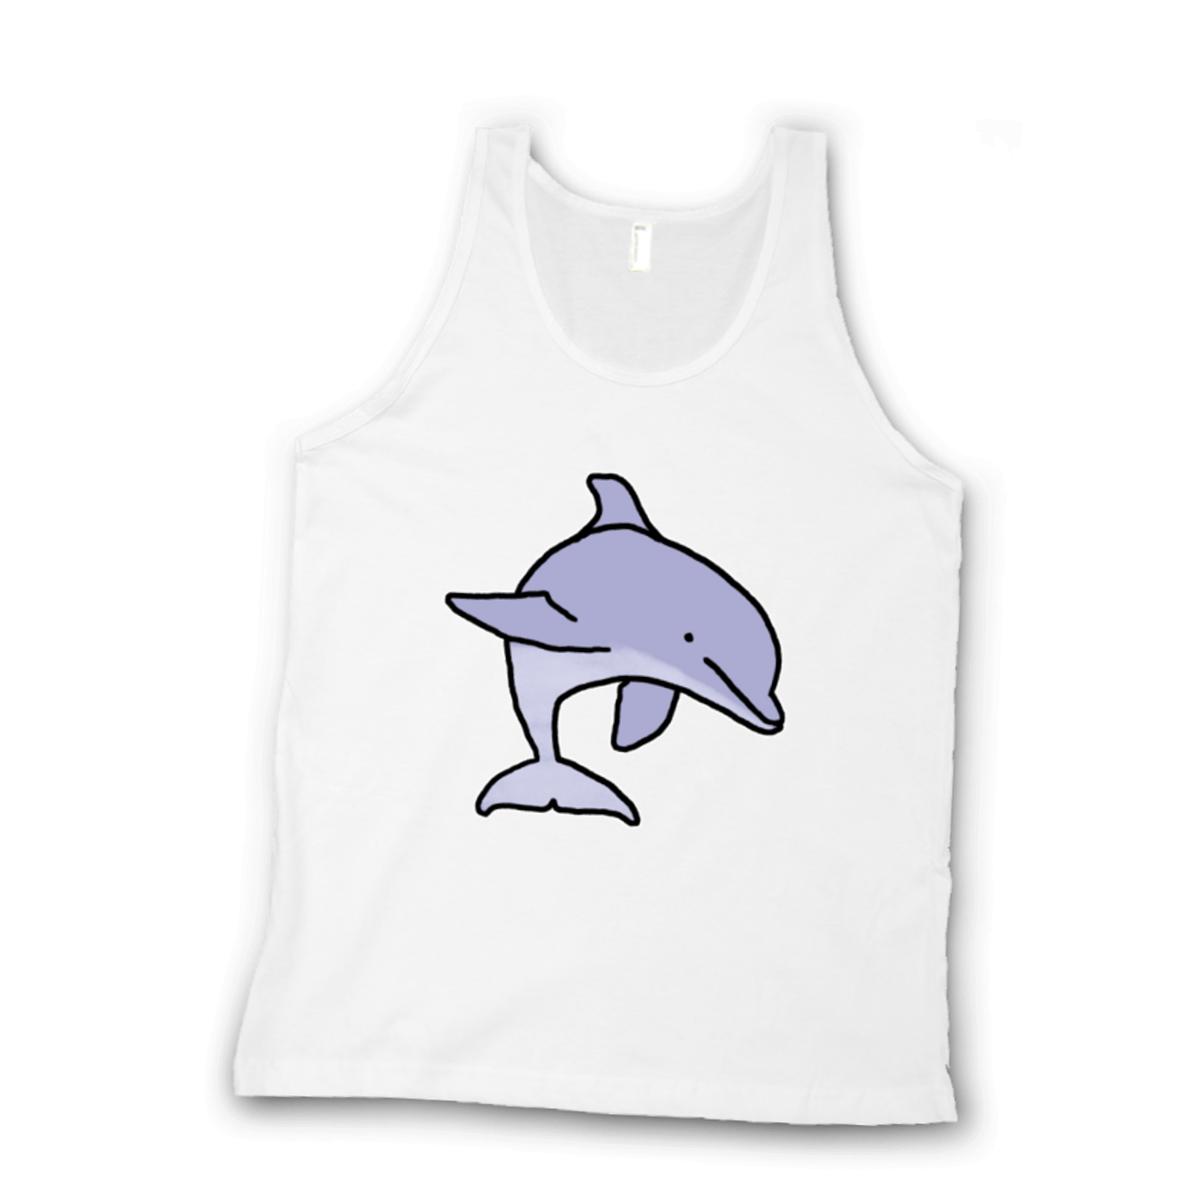 Dolphin Unisex Tank Top Large white